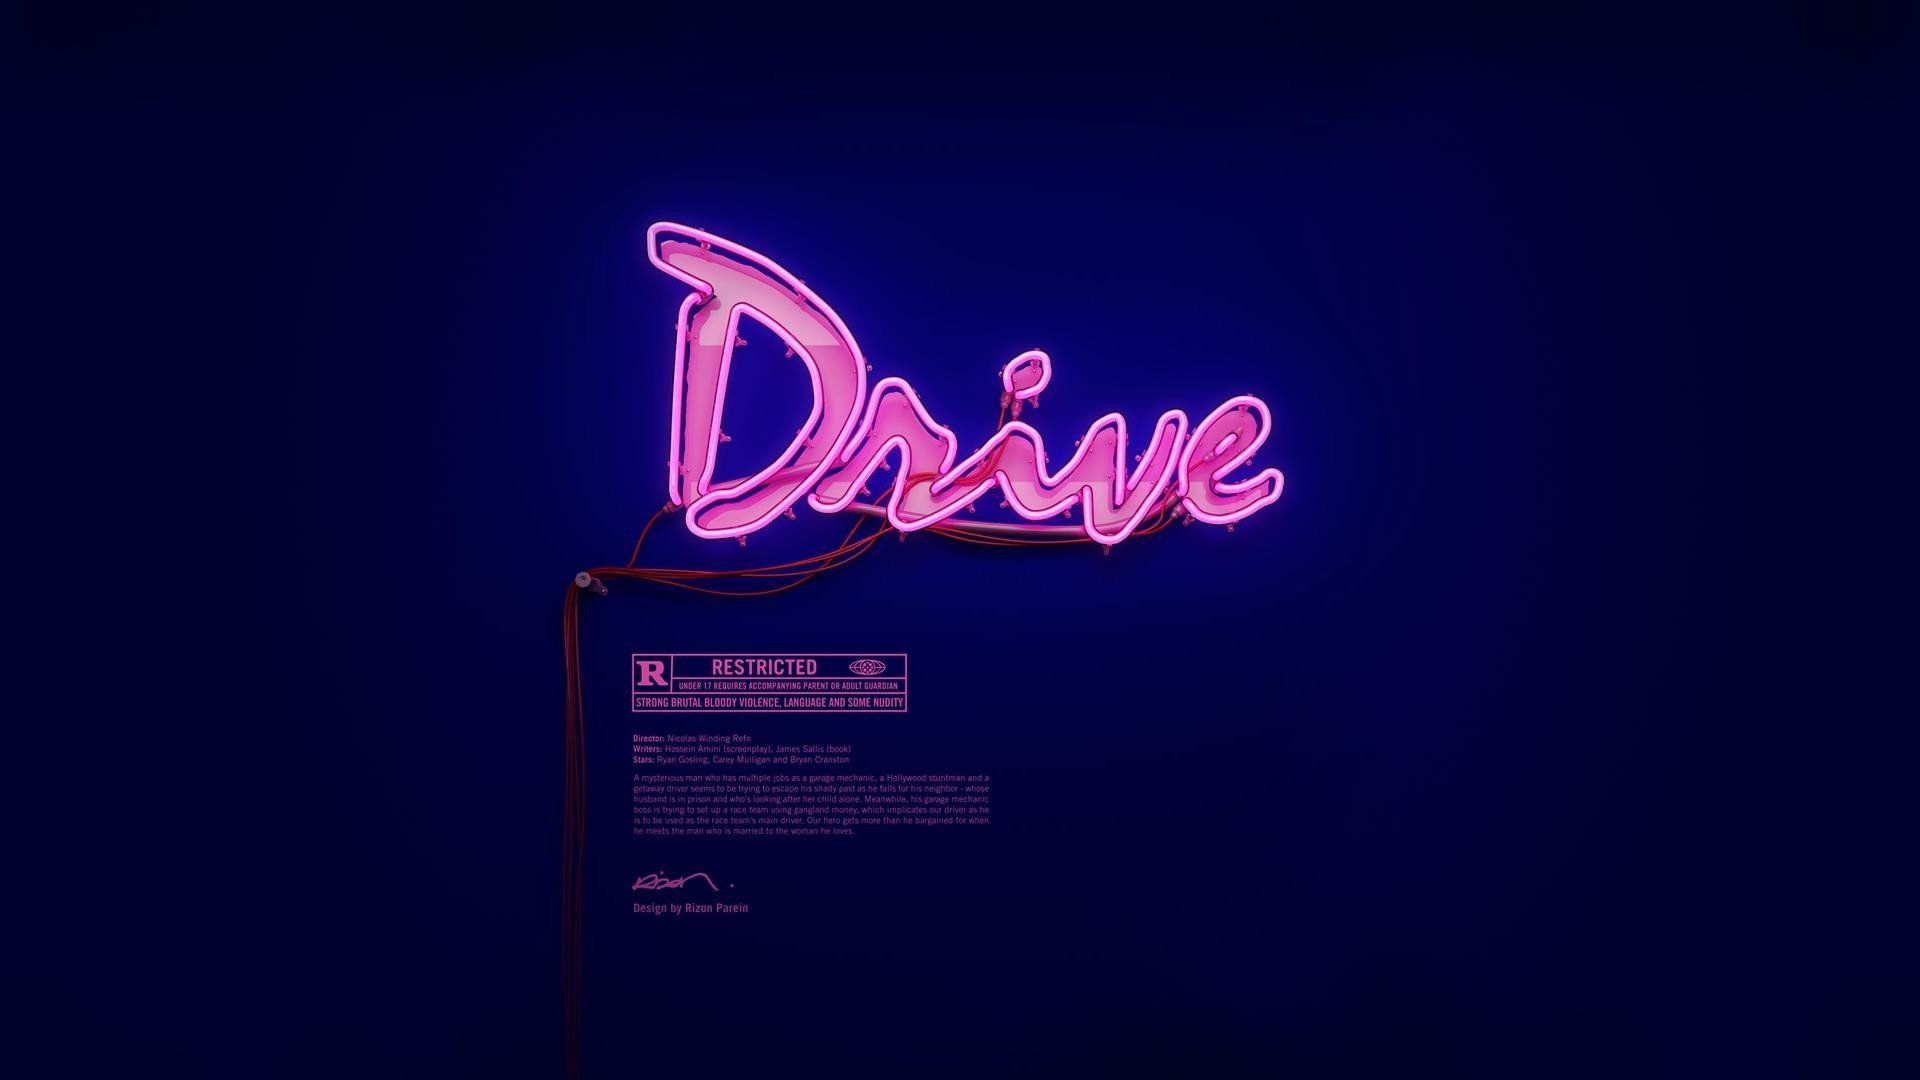 Free download movies drive Drive movie neon wallpaper background [1920x1080] for your Desktop, Mobile & Tablet. Explore Drive Movie Wallpaper. Drive In Theater Wallpaper, Movie Mural Wallpaper